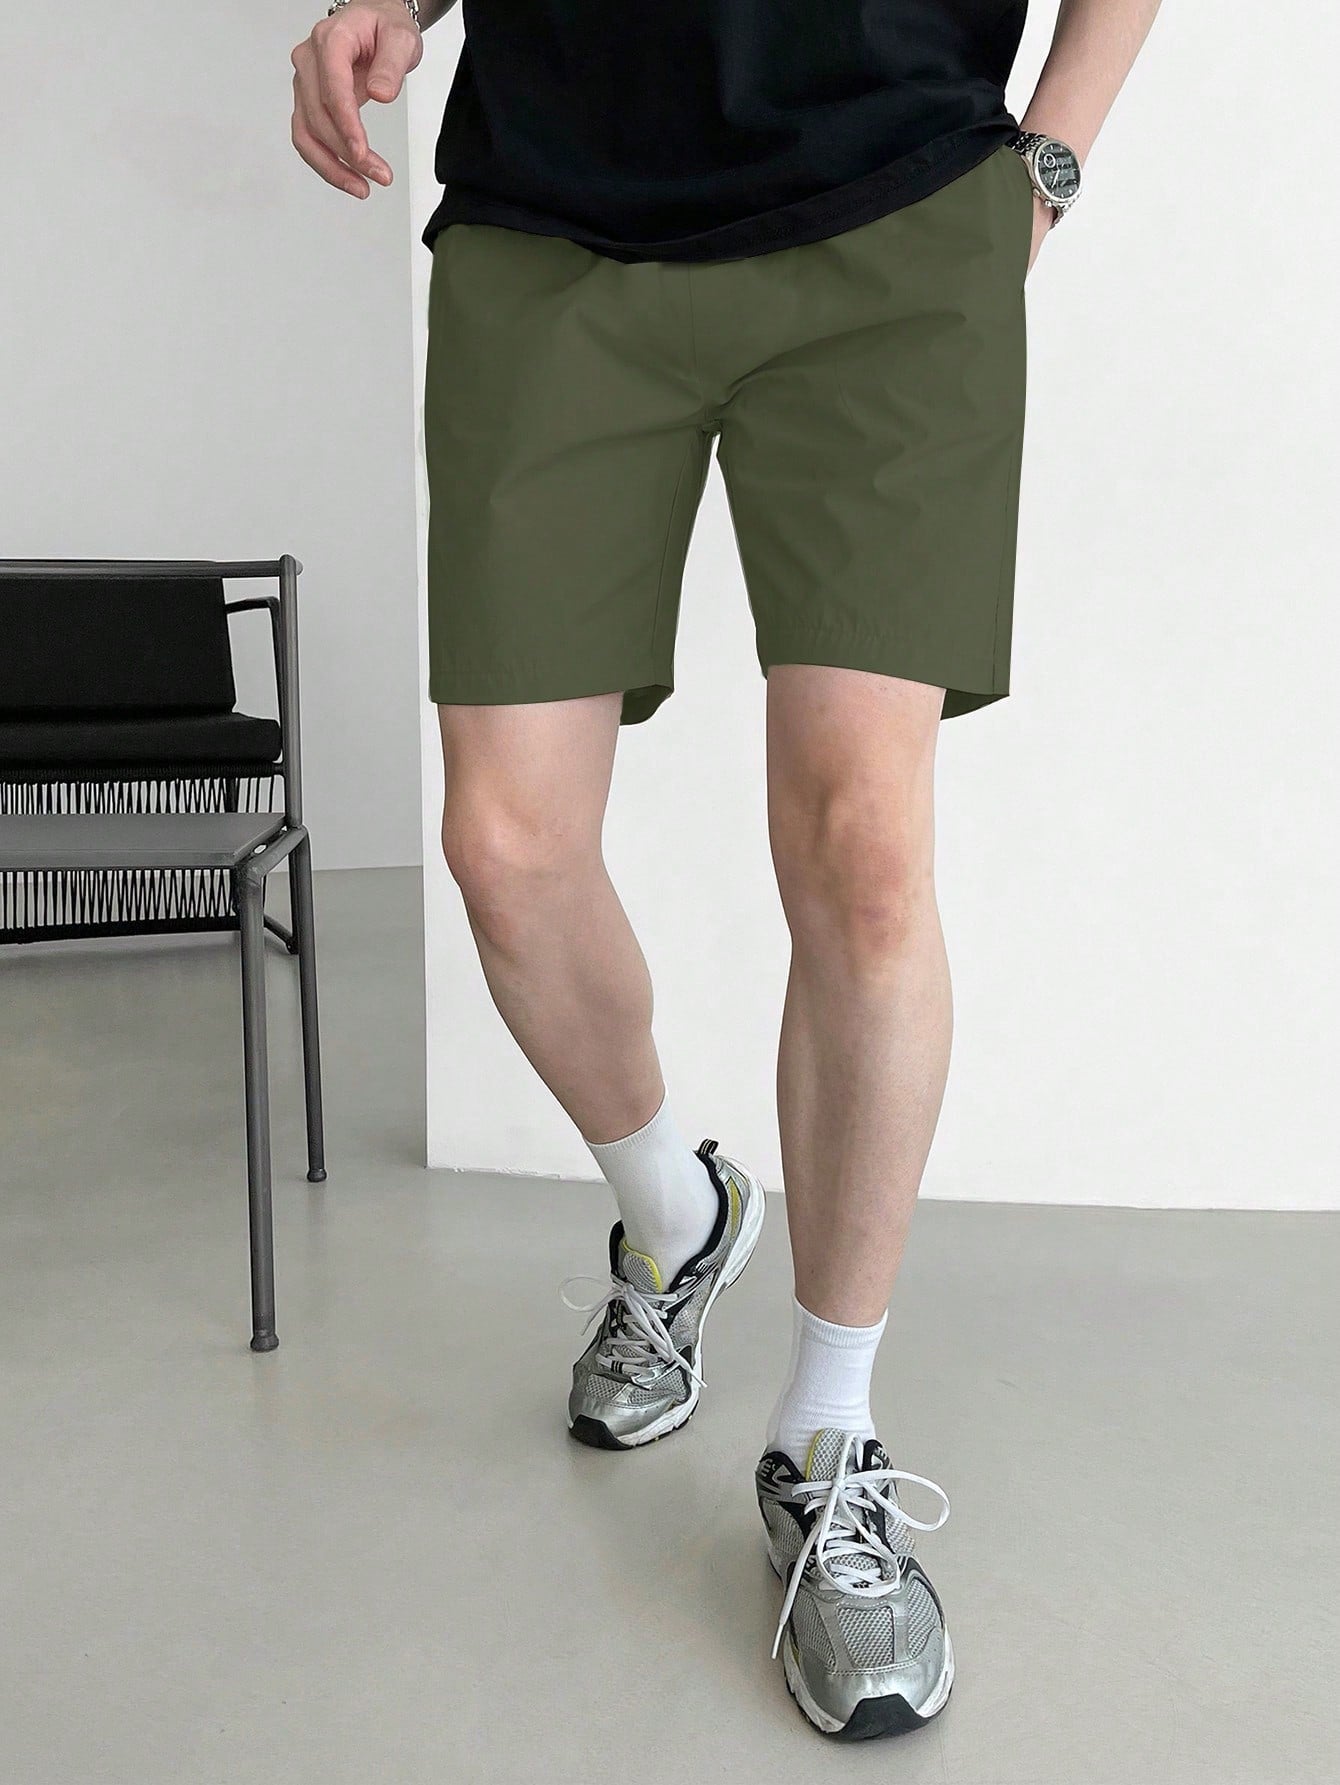 Men's Summer Solid Color Loose Fit Casual Shorts